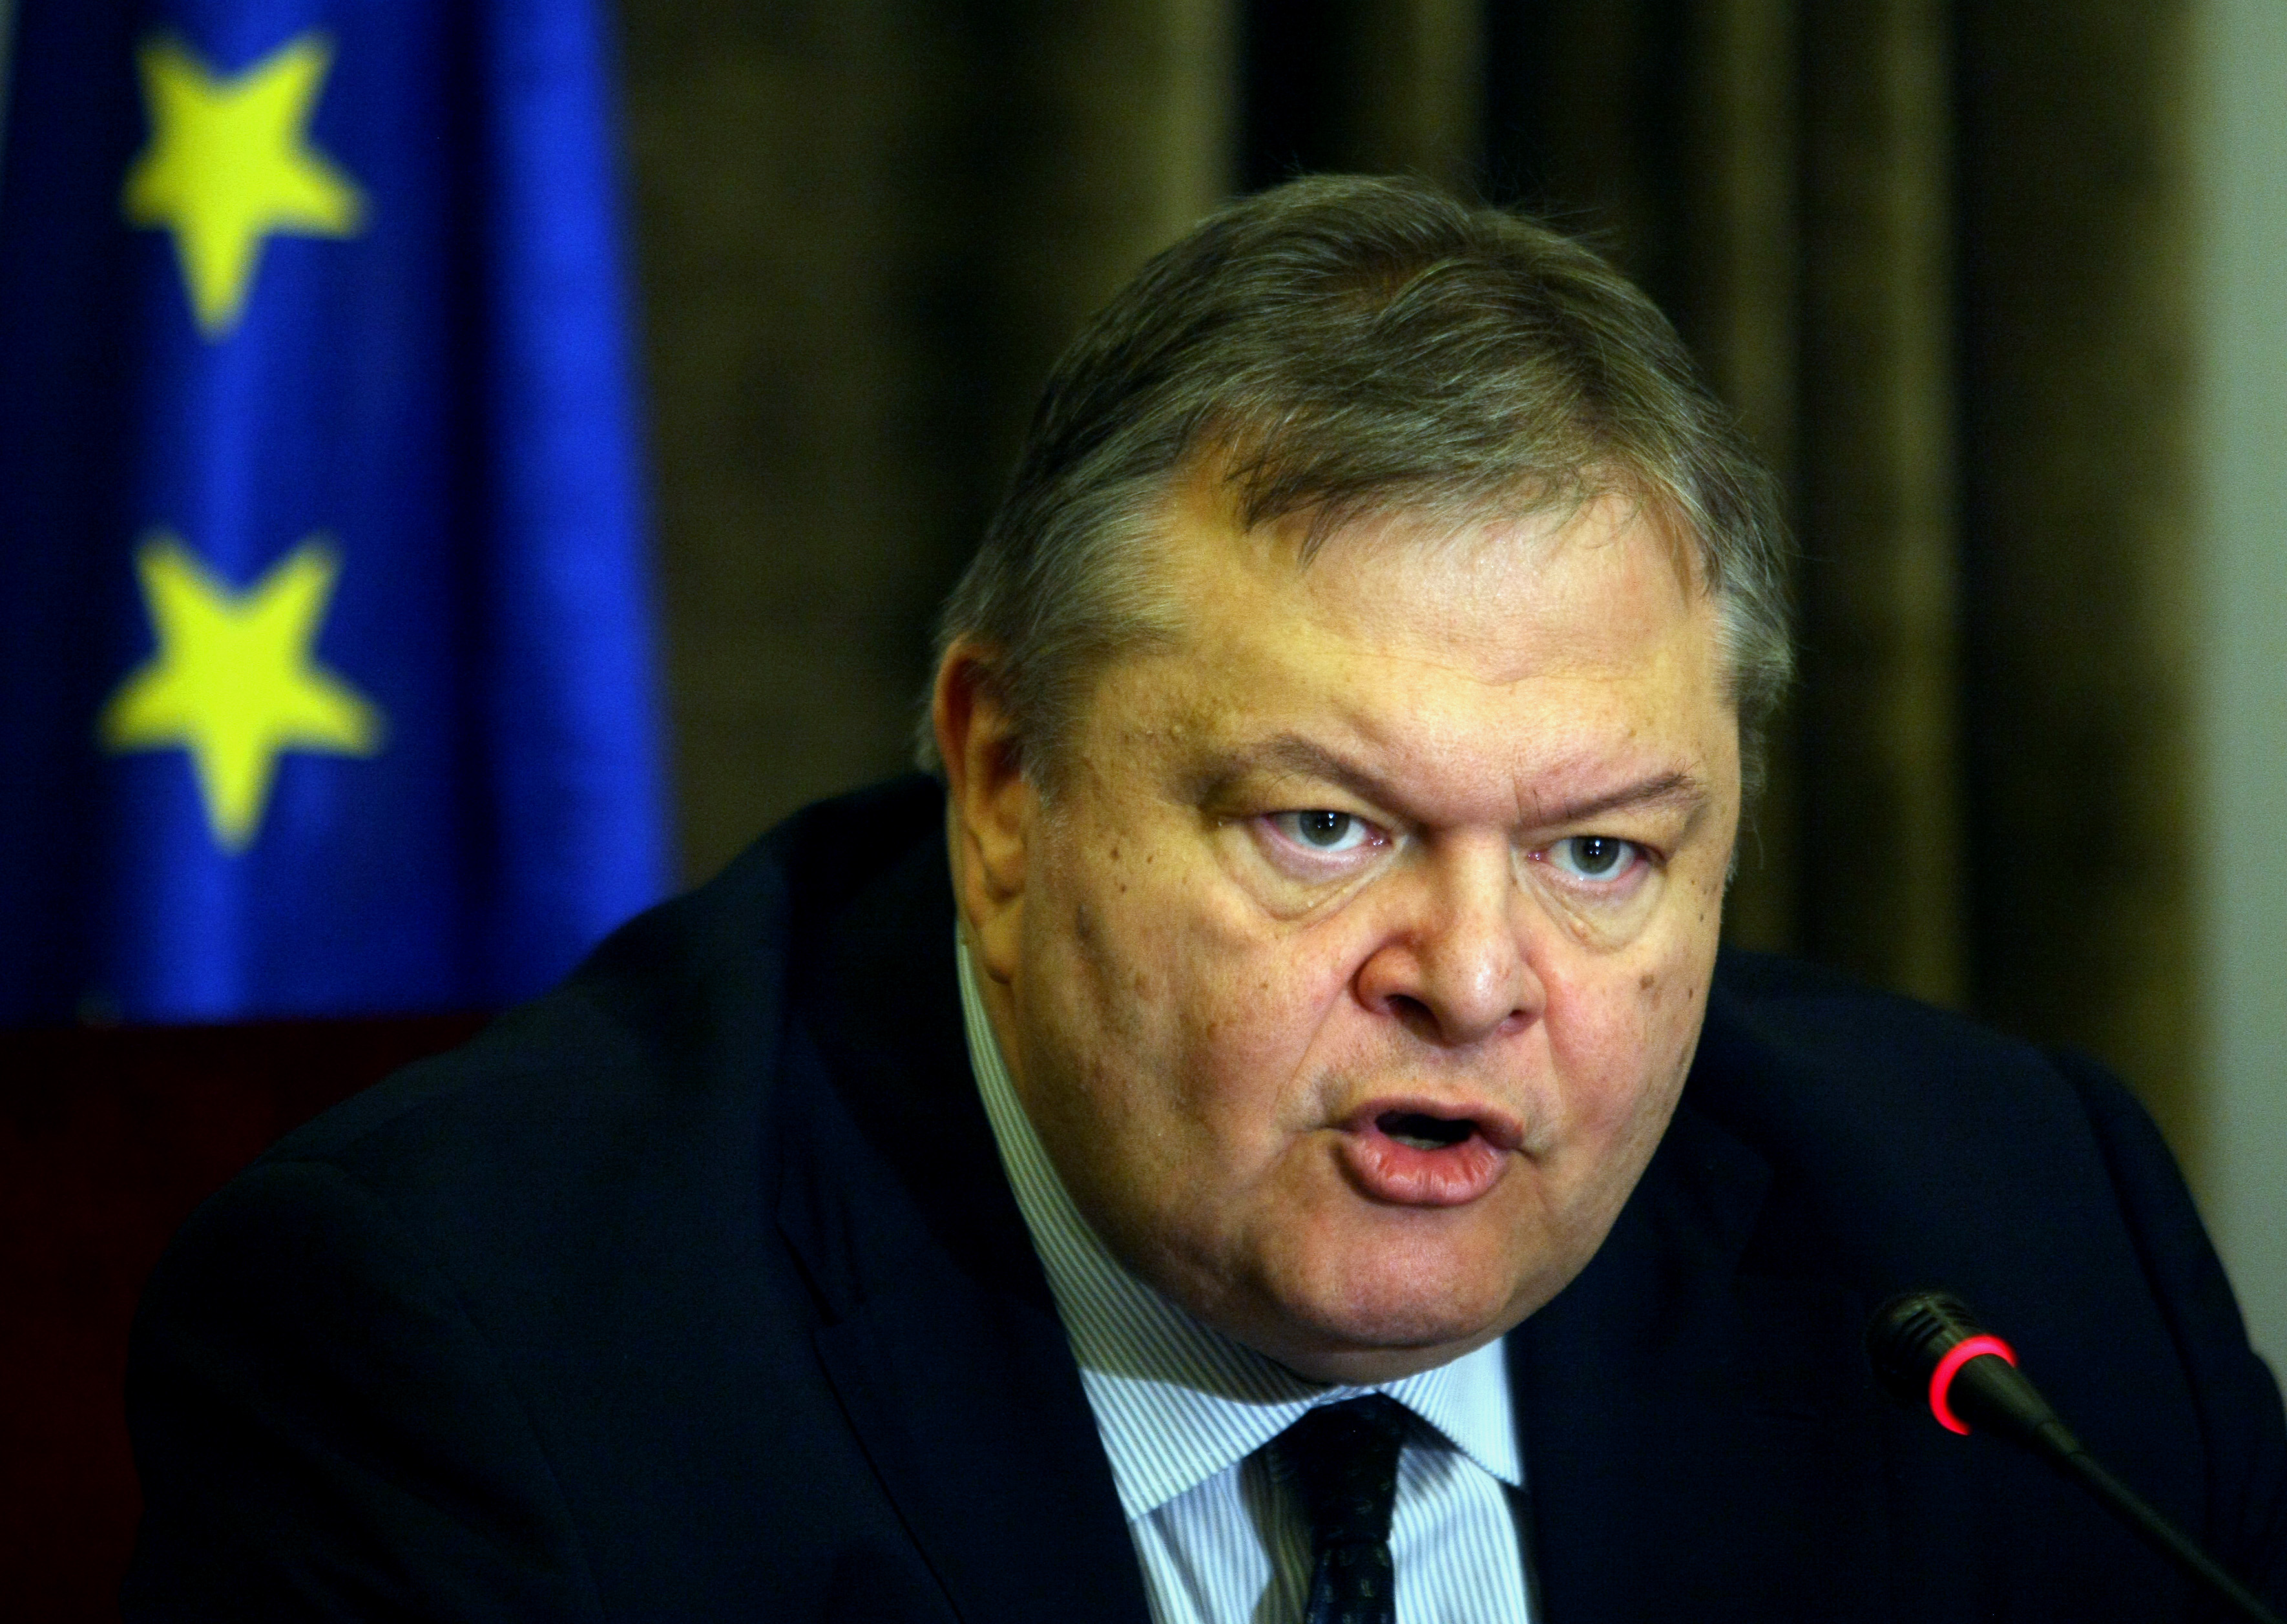 Venizelos: “The easy lies deeply harmed the country”